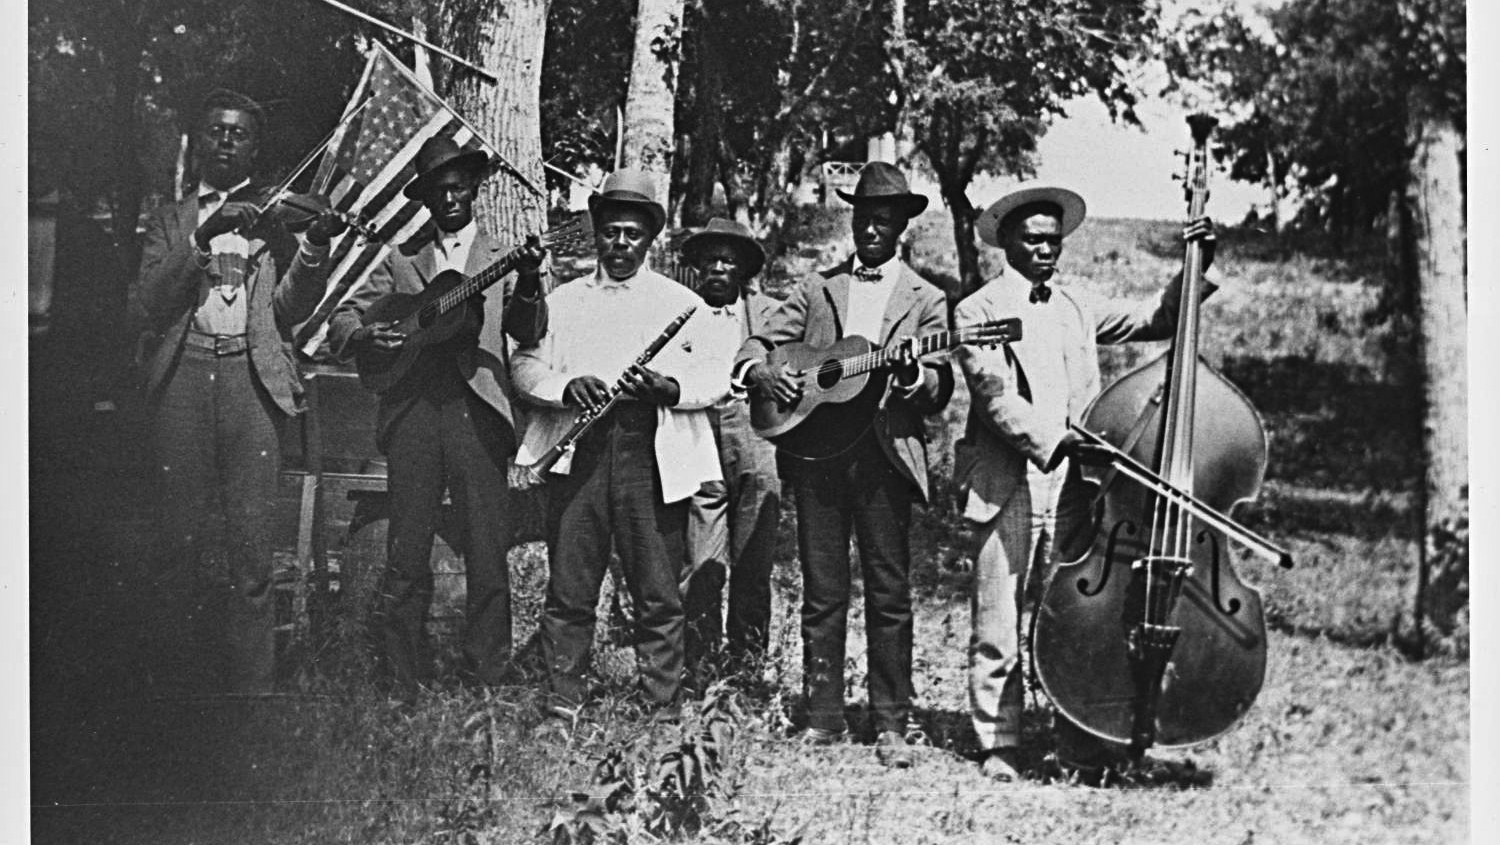 Emancipation Day Celebration band in Texas, June 19, 1900.